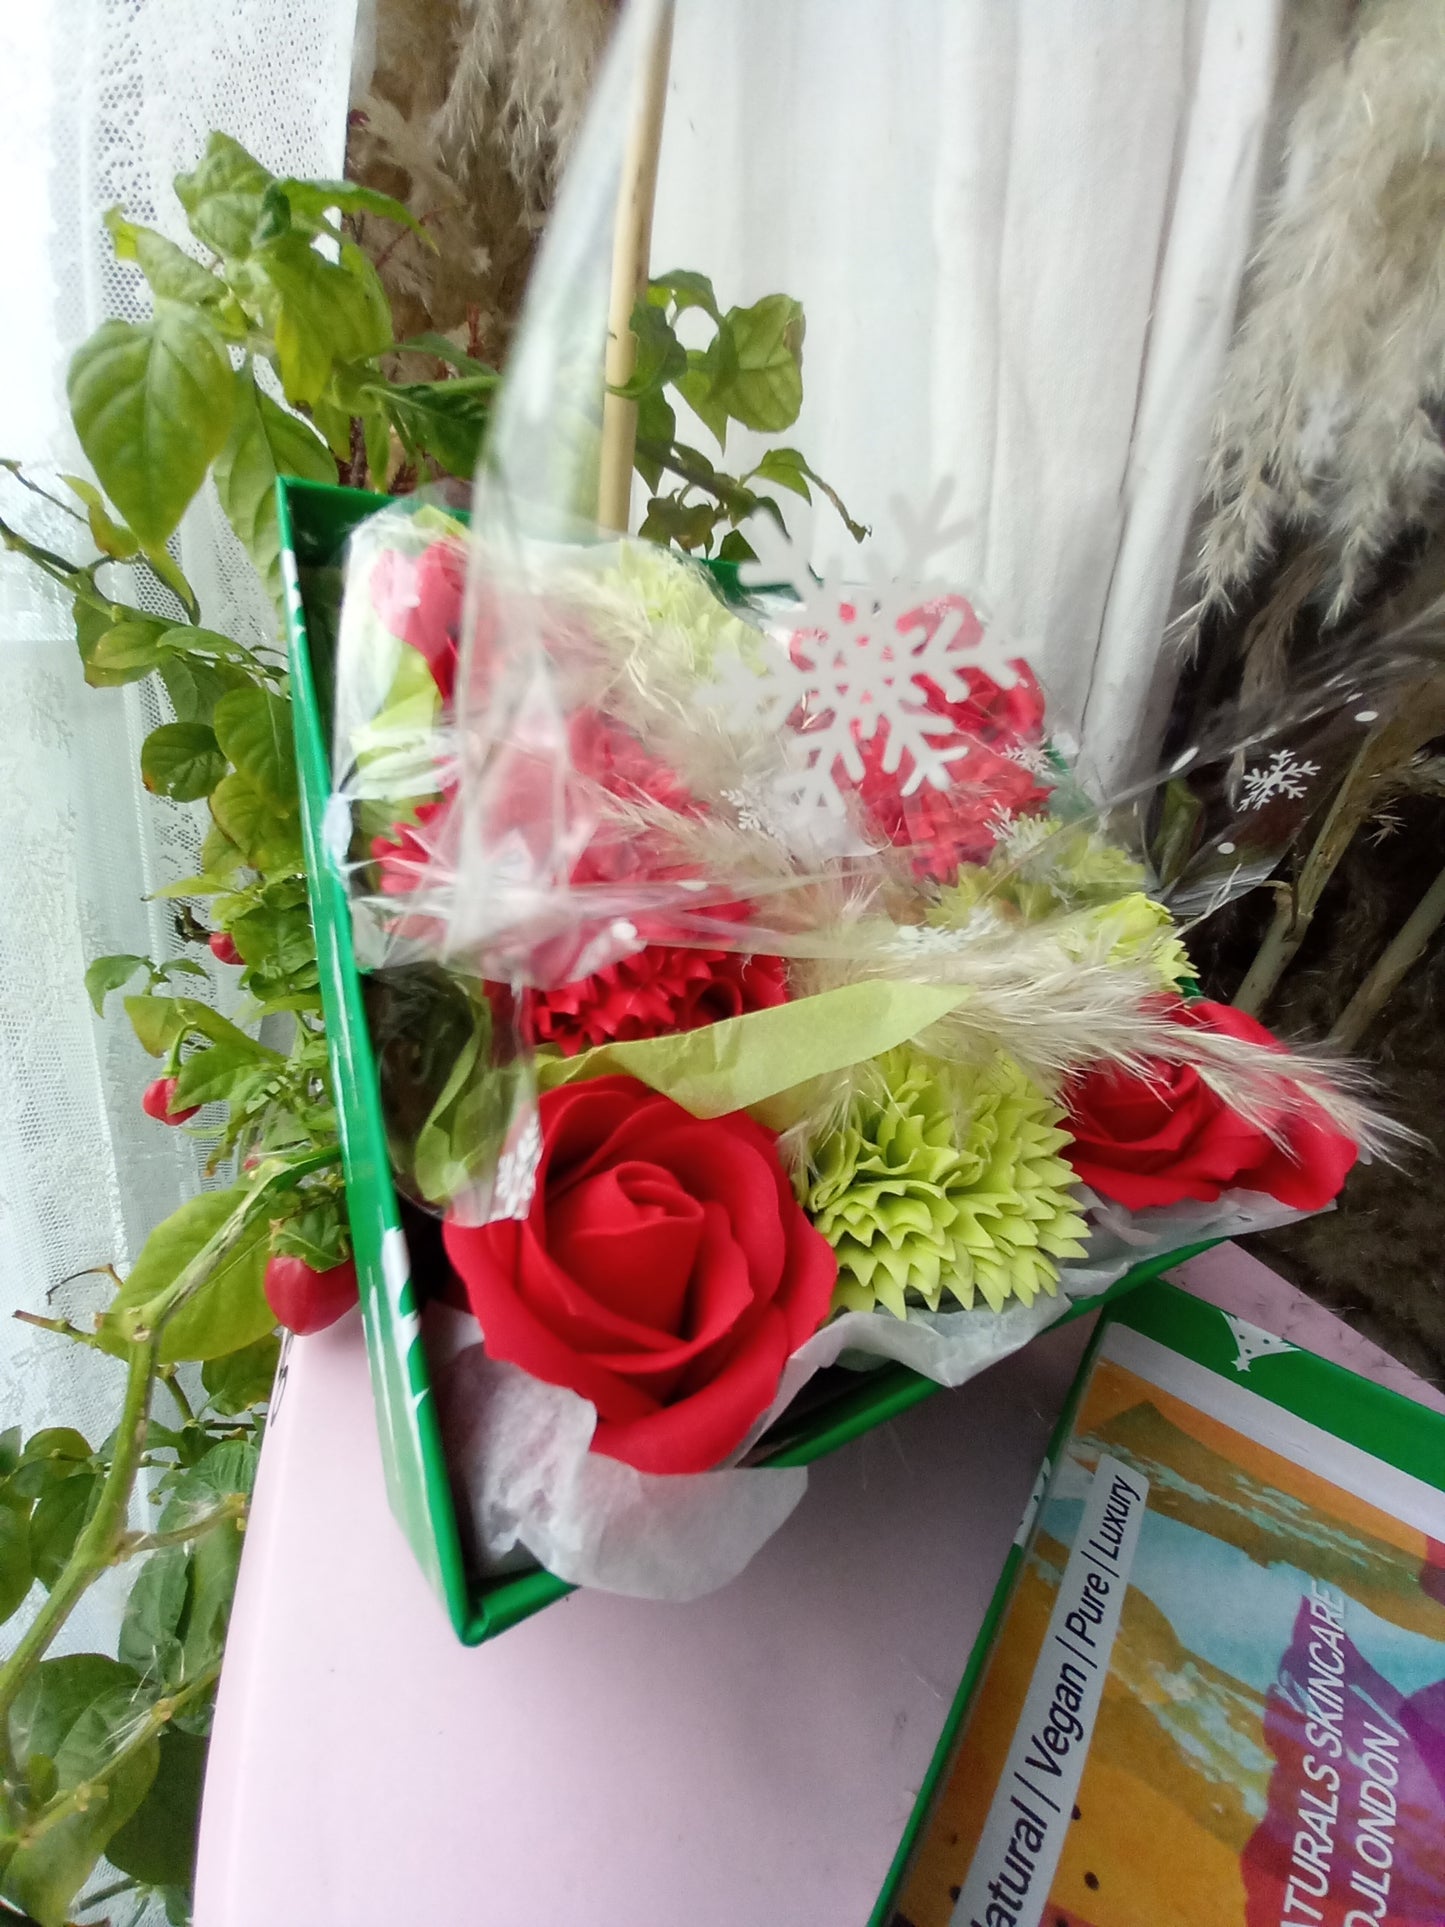 RED ON GREEN FLOWER SOAP IN CANDY CANE DISPLAY BOX